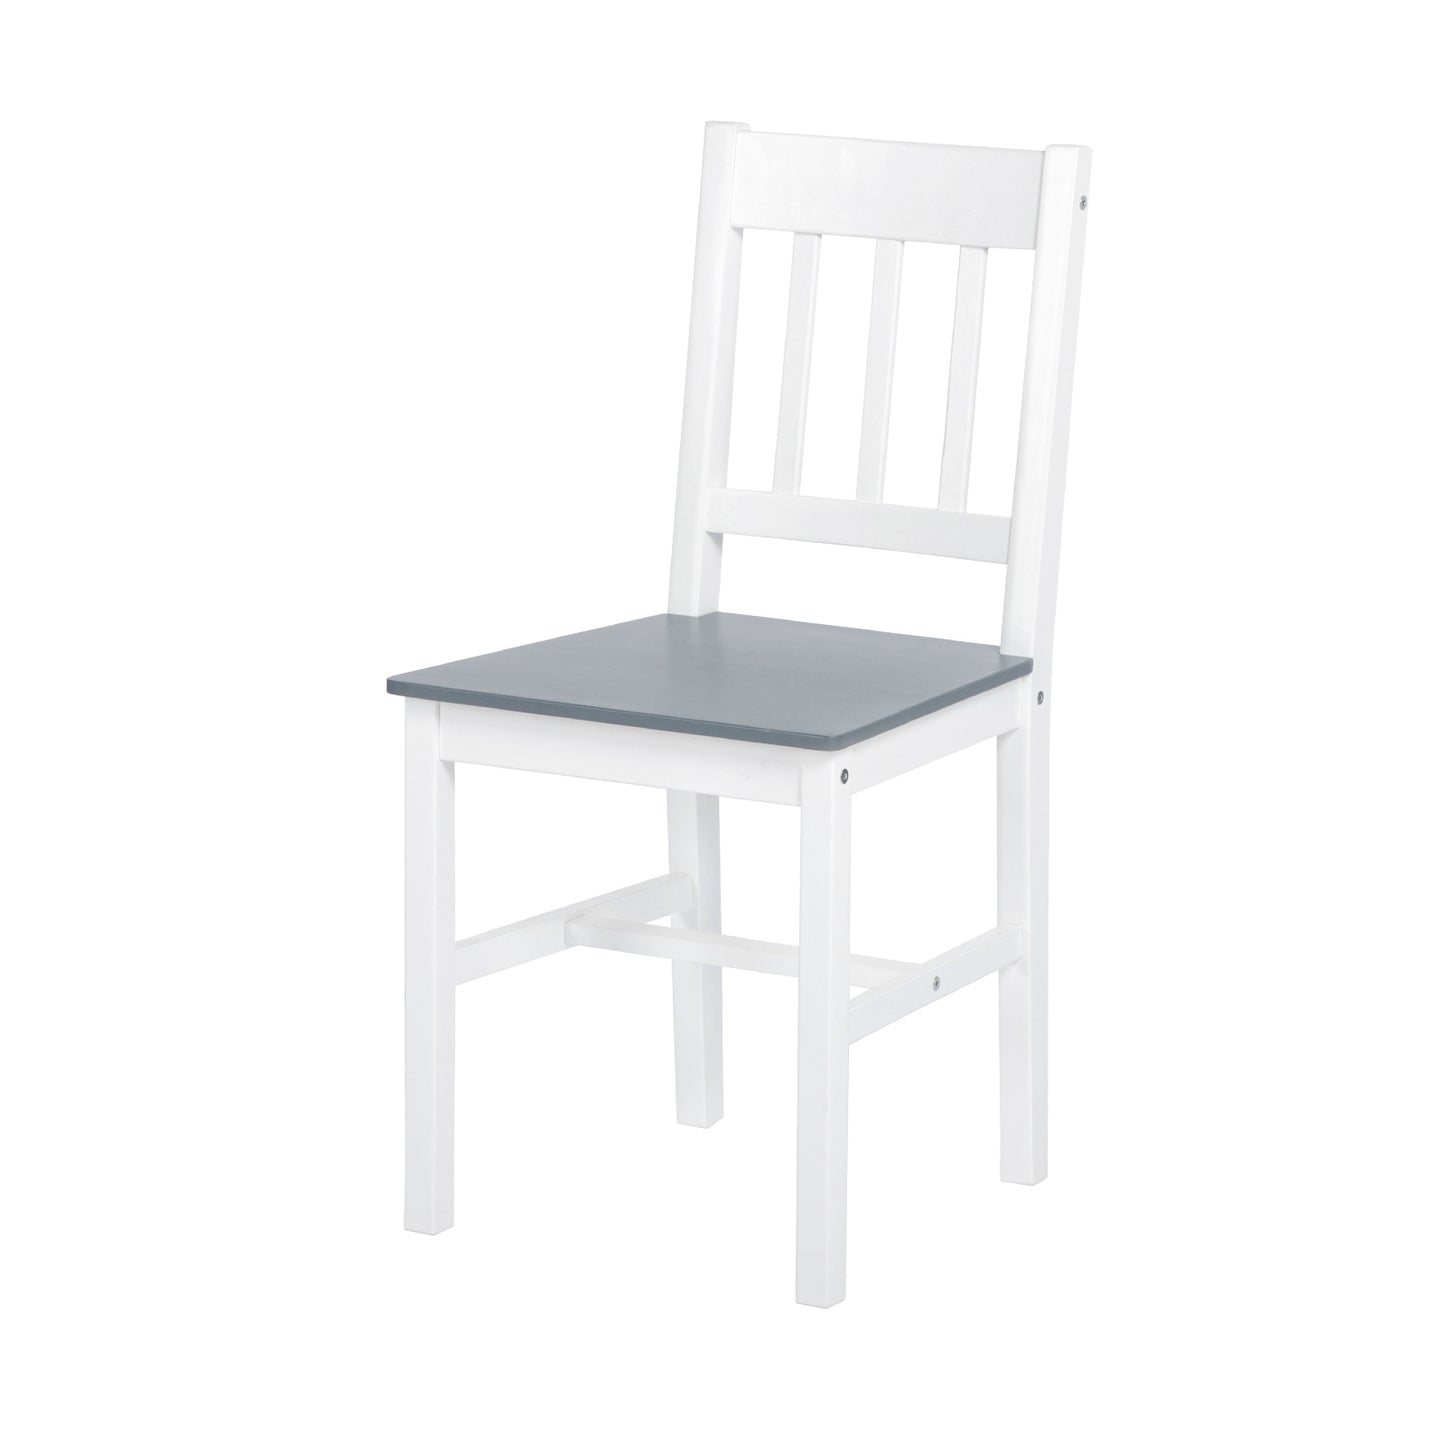 JOEL Square Dining Set -White and Gray